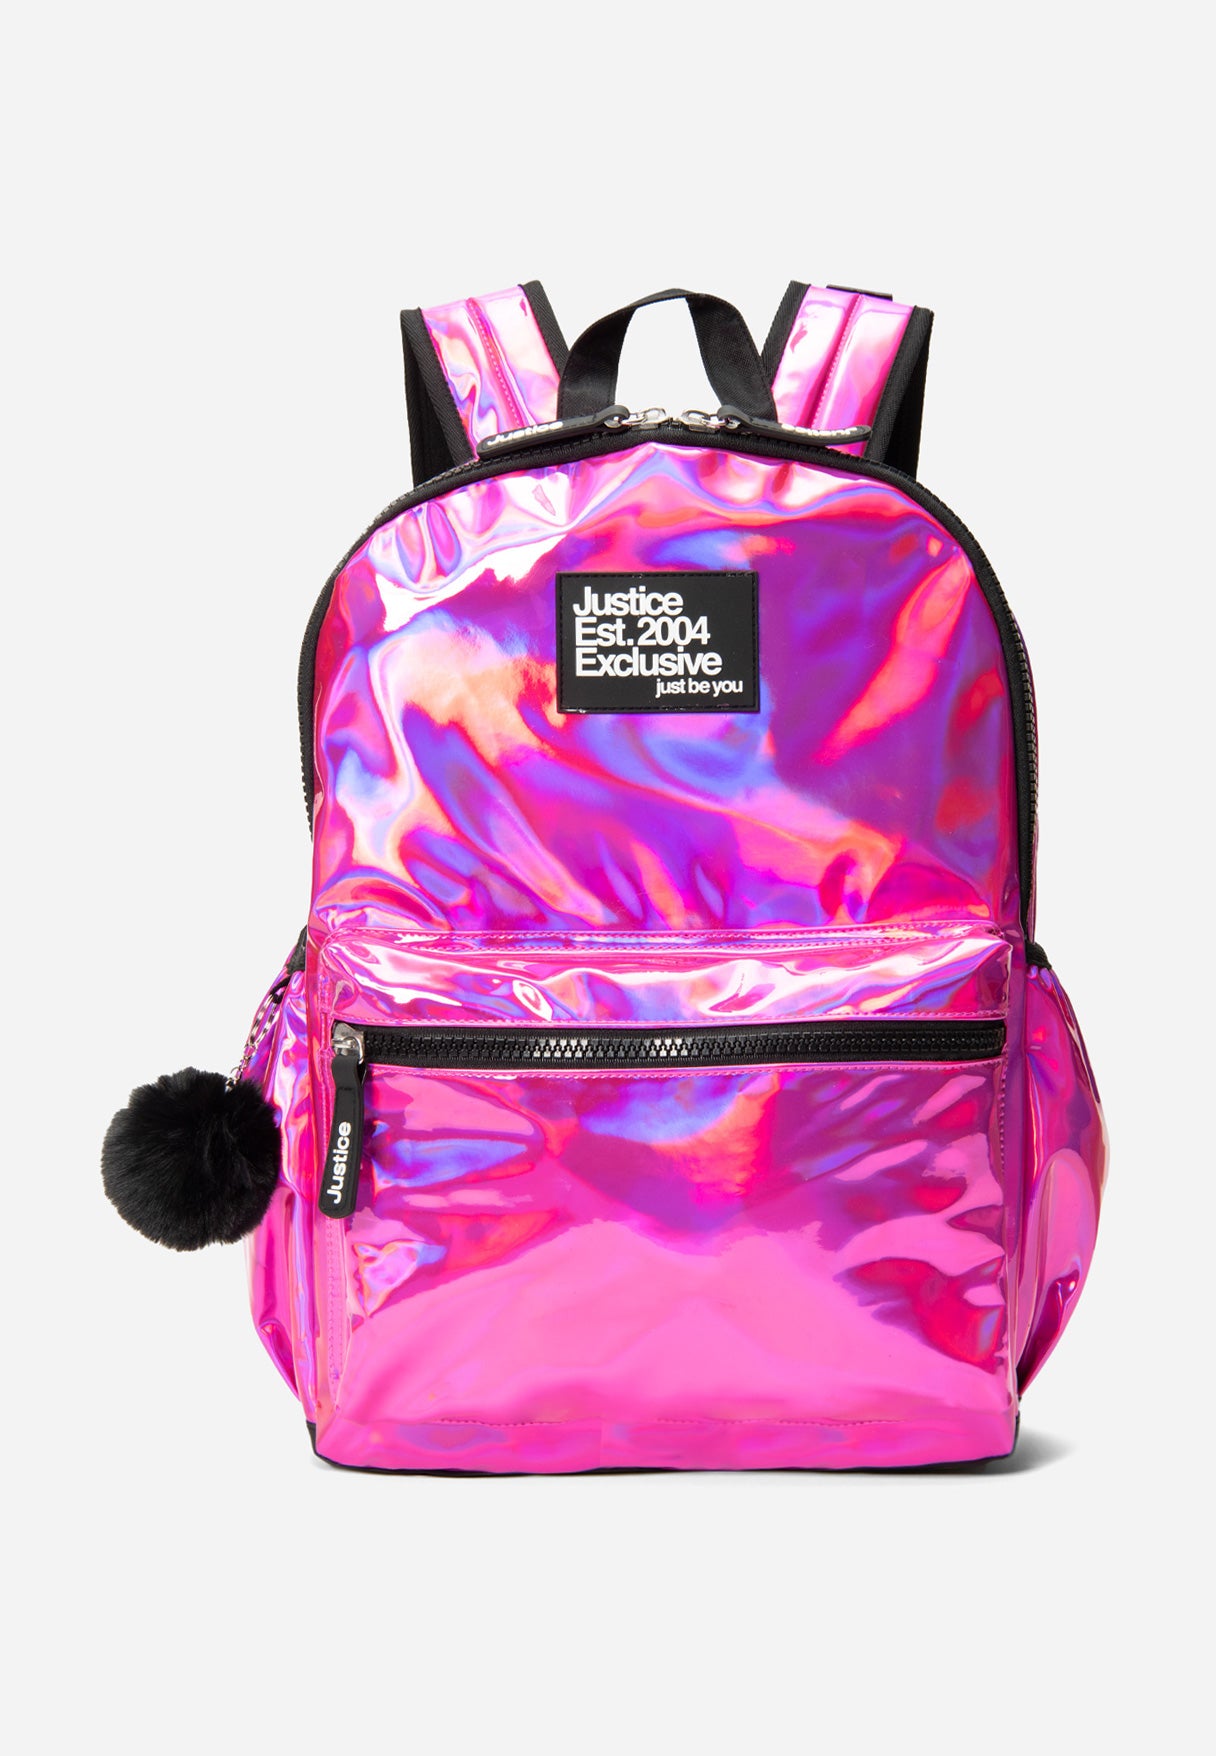 Justice Girl's Metallic Backpack with Keychain in Pink Oil, Size One Size